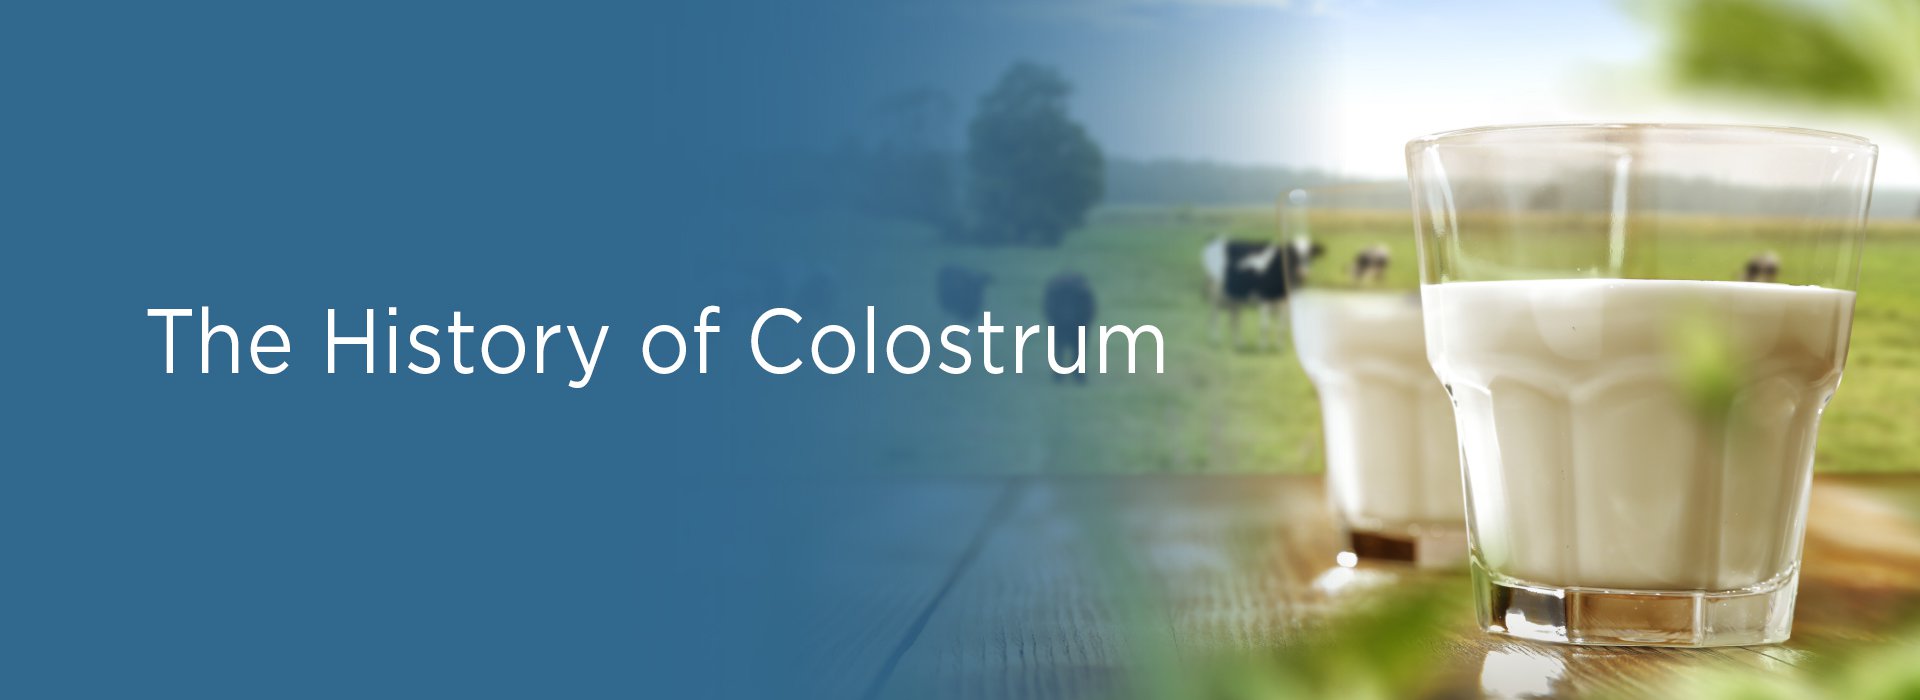 New Image International:The History of Colostrum